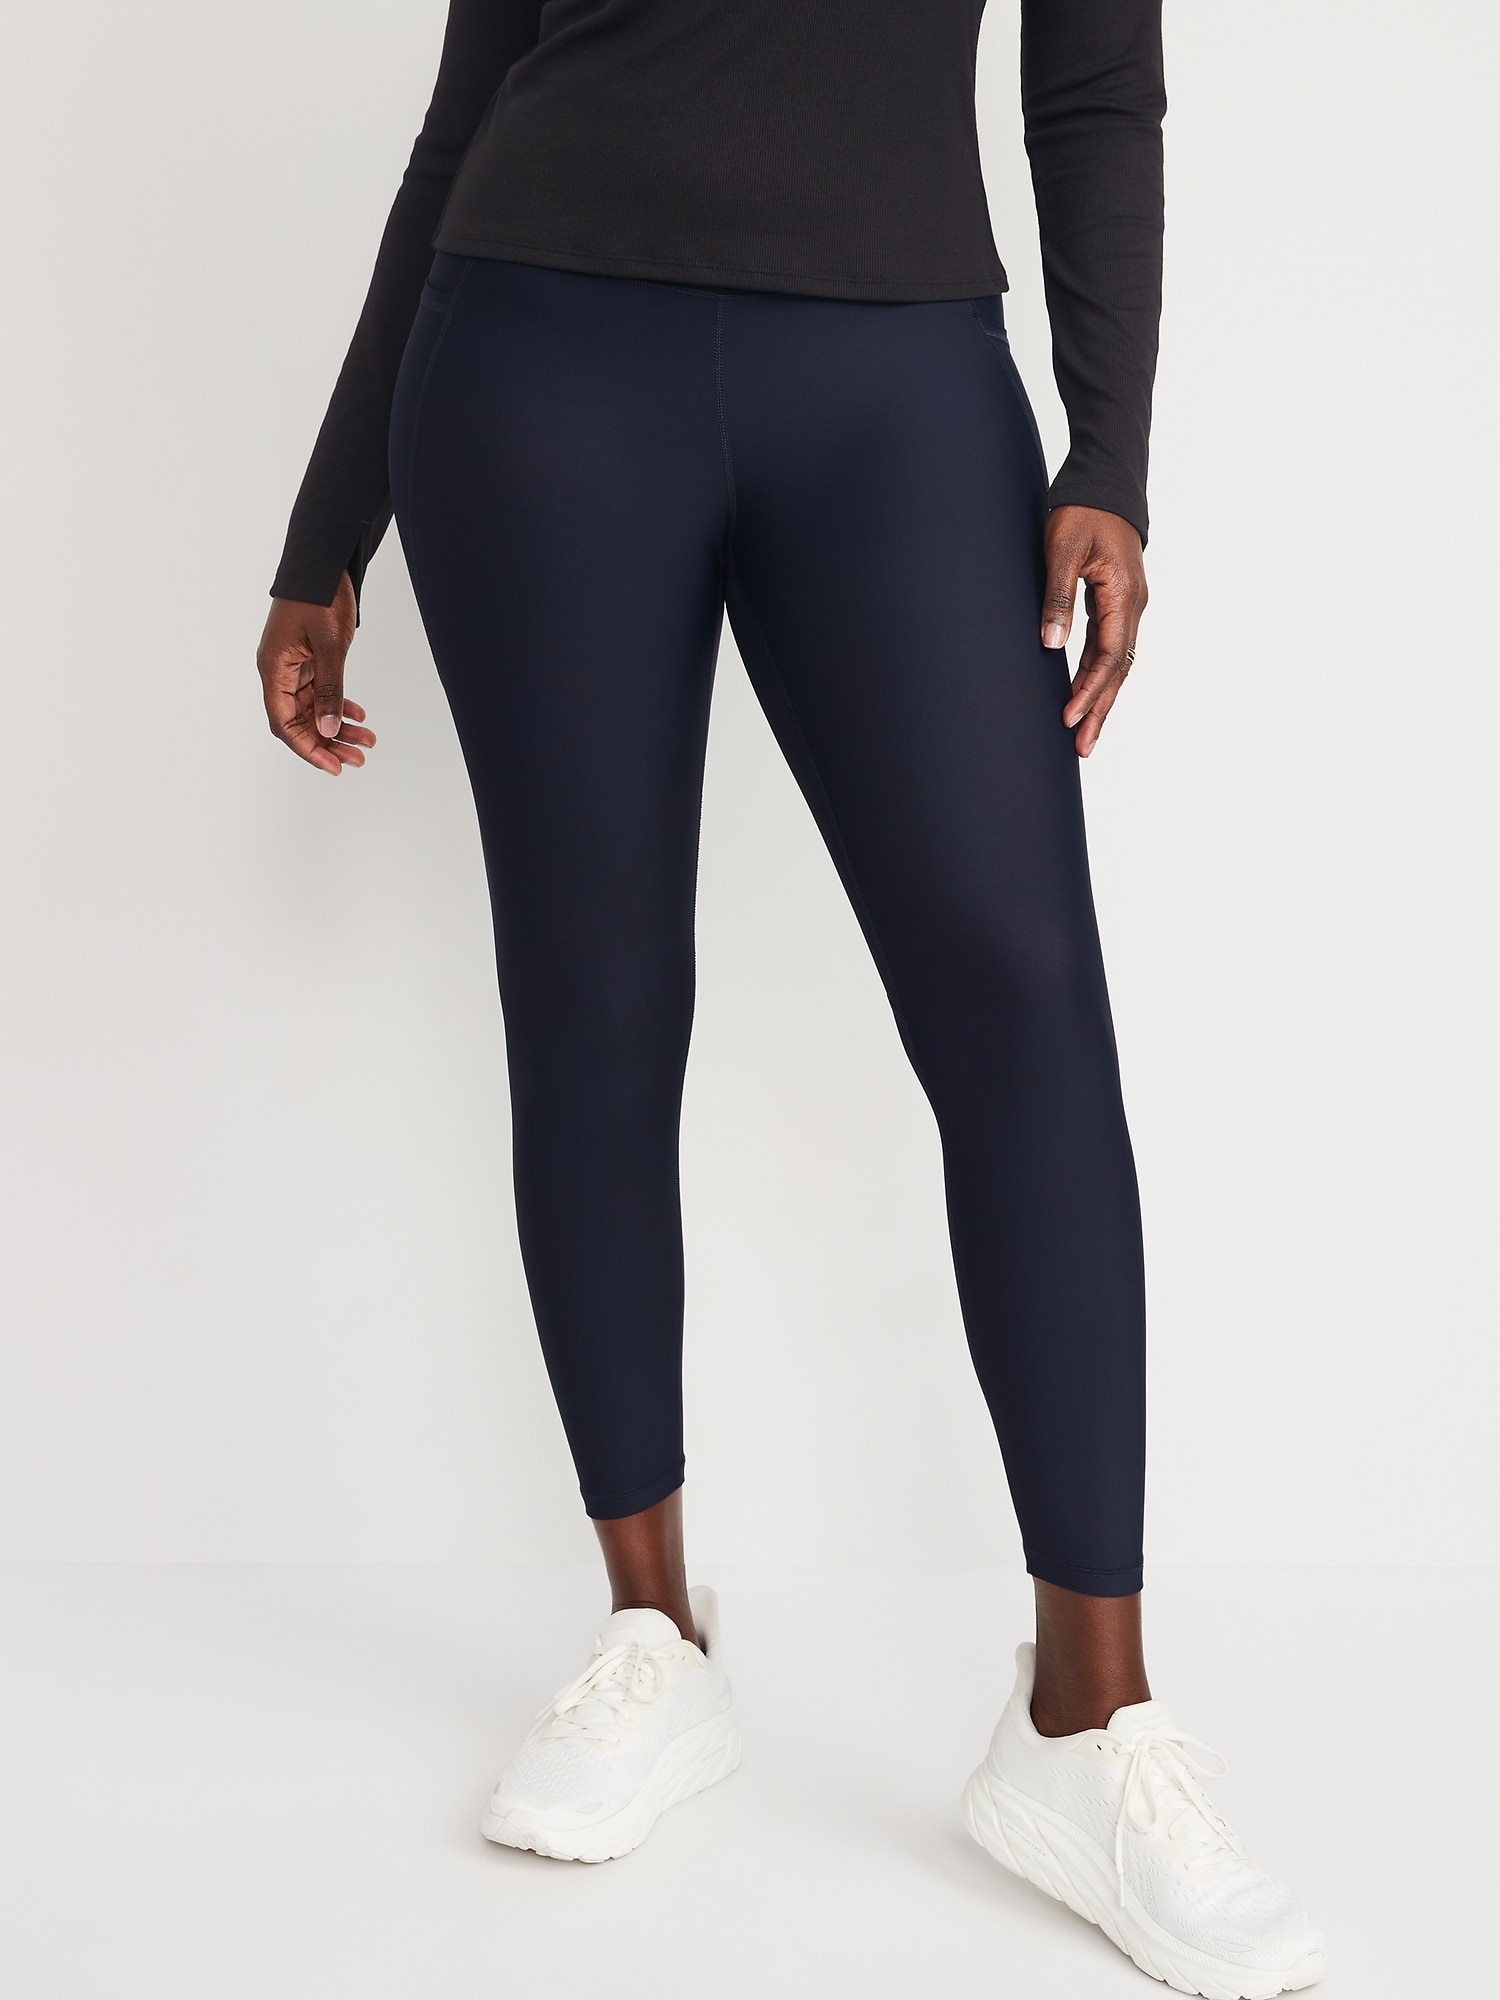 Old Navy Active NWT XL Coral High Rise 7/8 Ankle Go-Dry Balance Knit  Leggings - $22 New With Tags - From Gabrielle